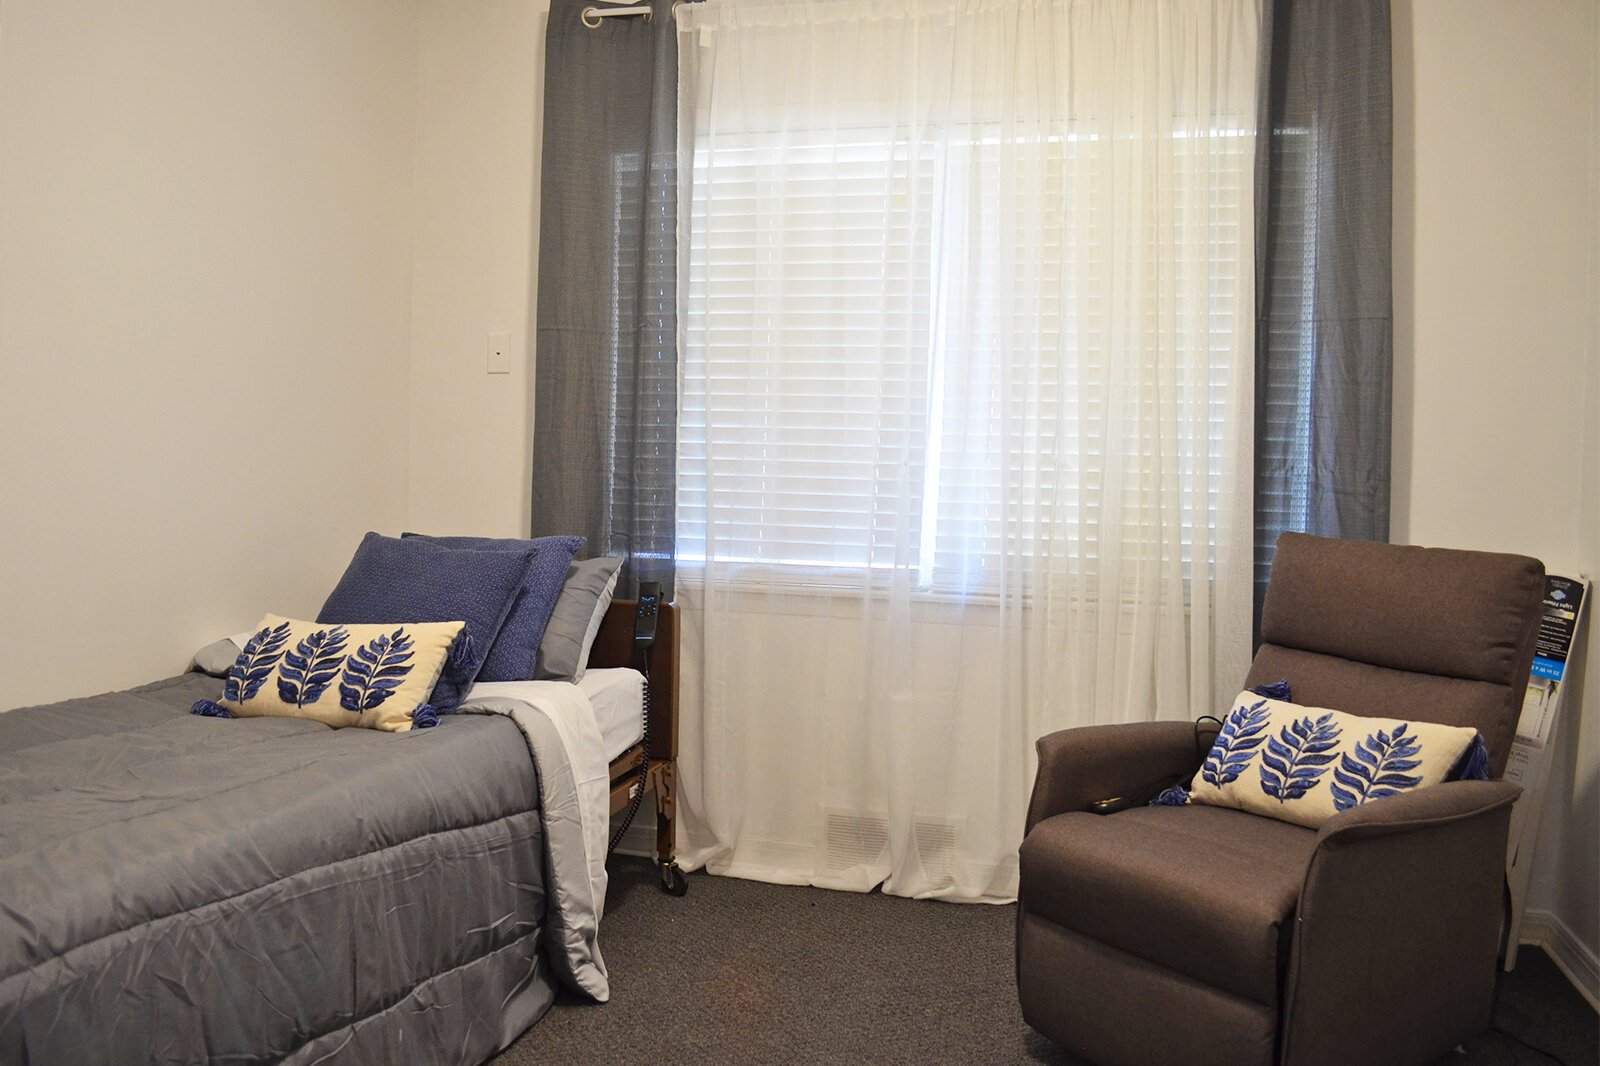 There are several different areas inside Thrive where an older adult can rest.